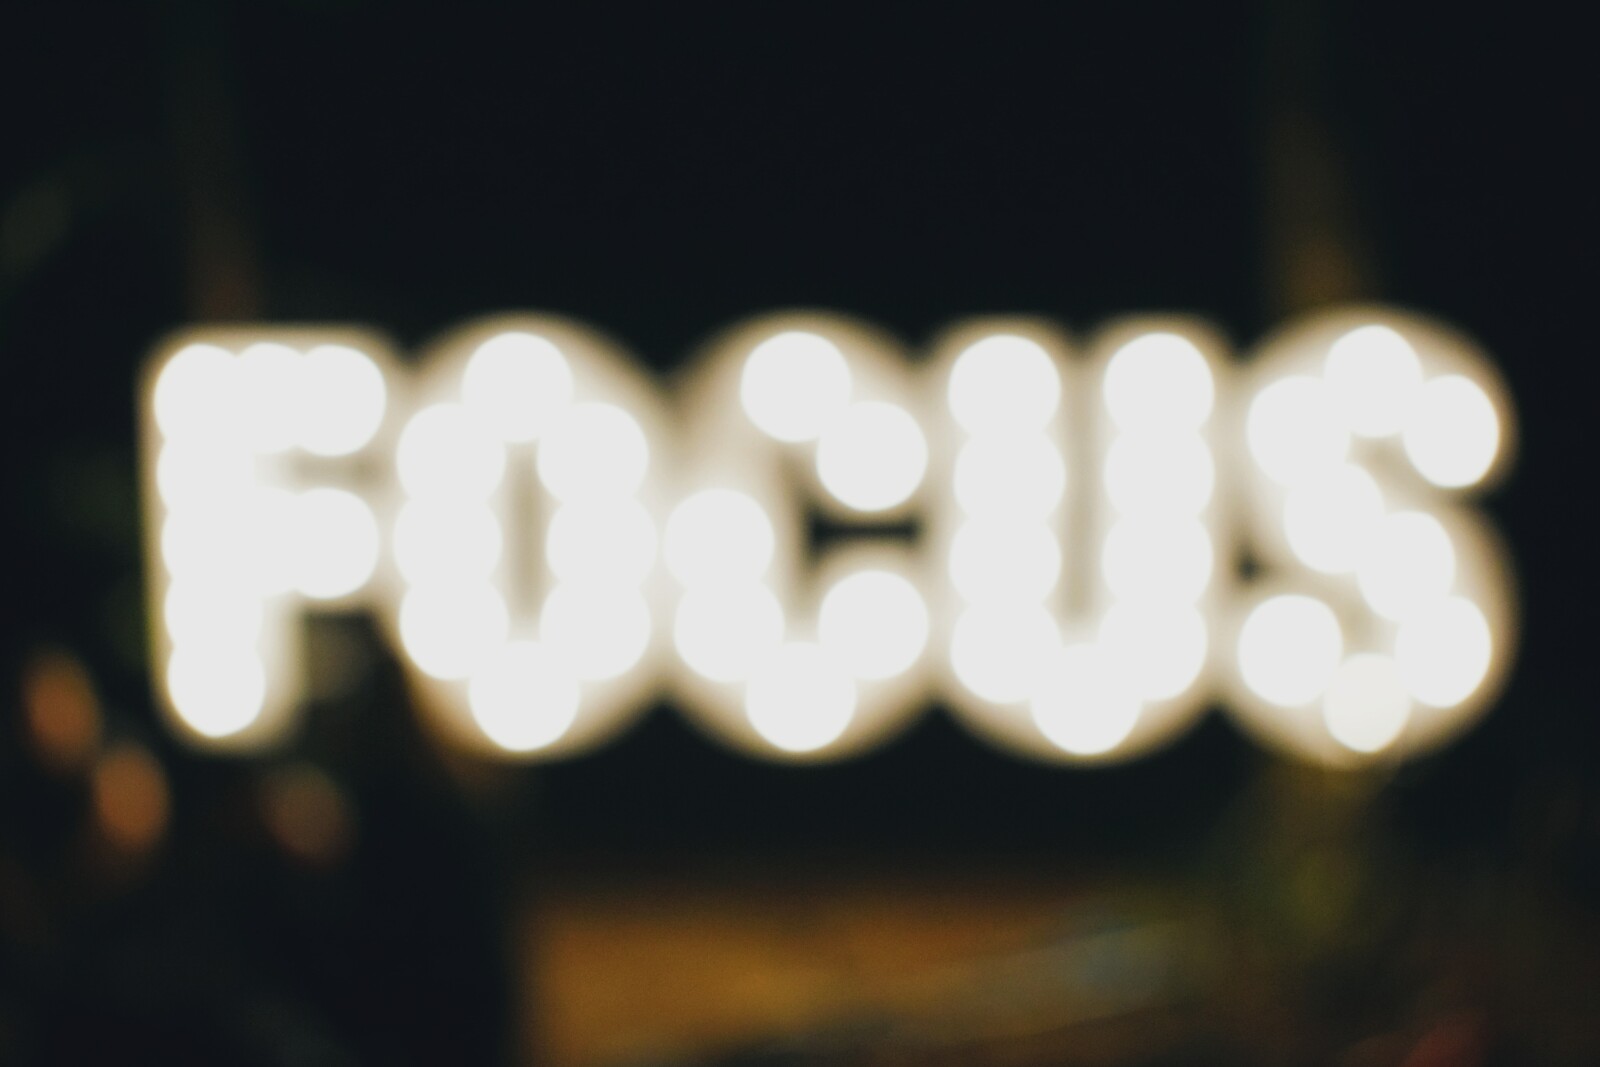 It’s often said, “You get what you focus on.”